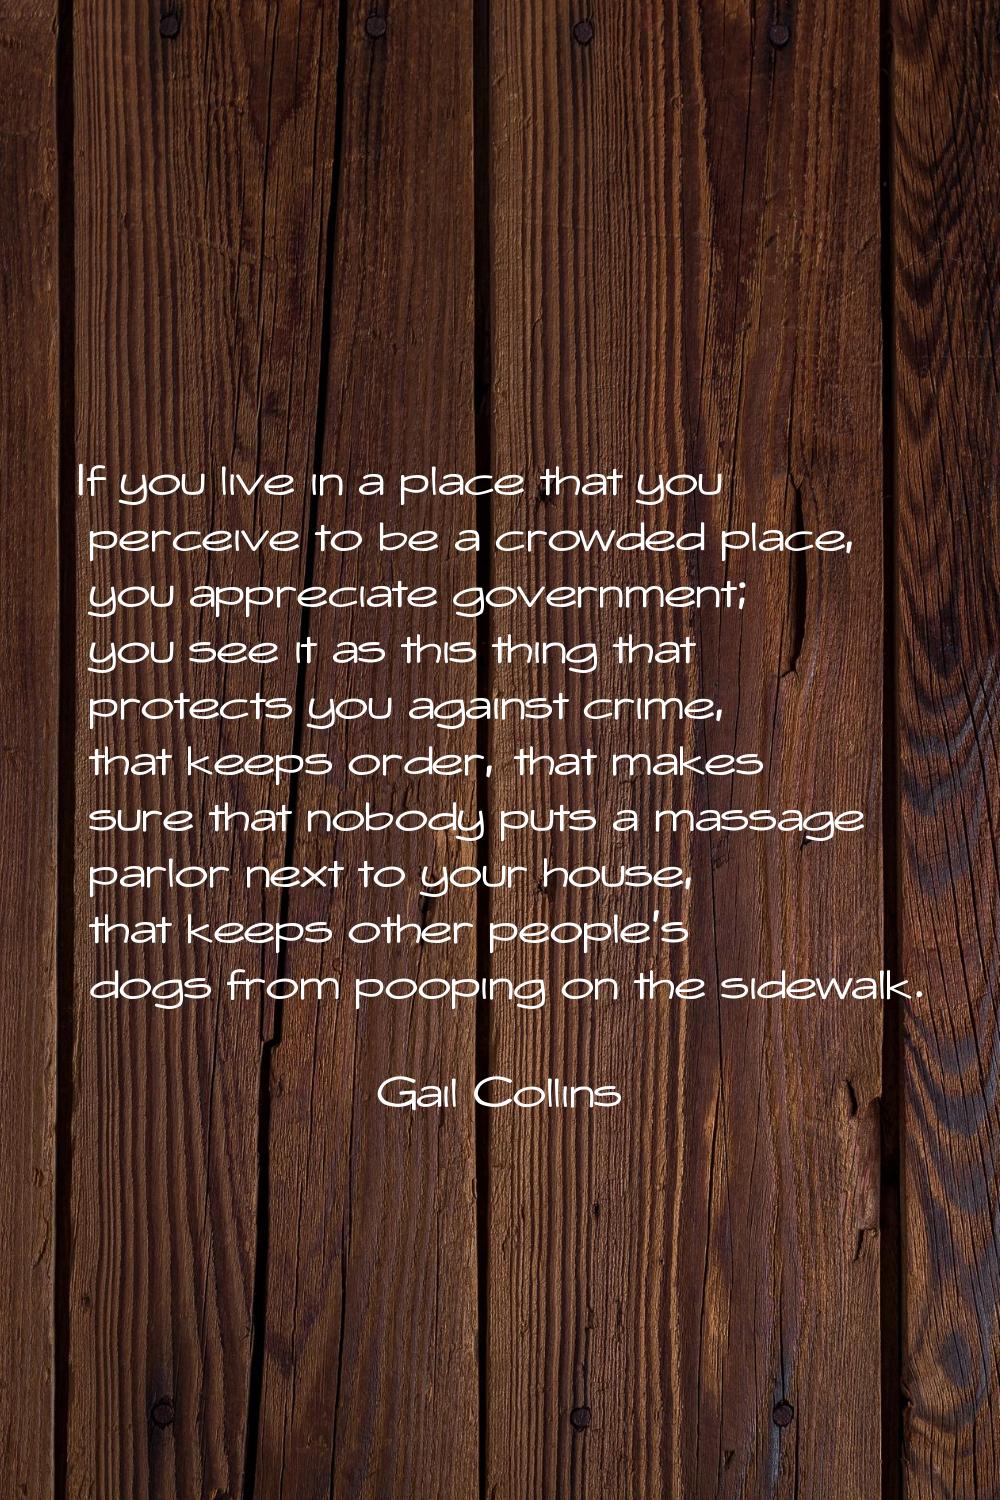 If you live in a place that you perceive to be a crowded place, you appreciate government; you see 